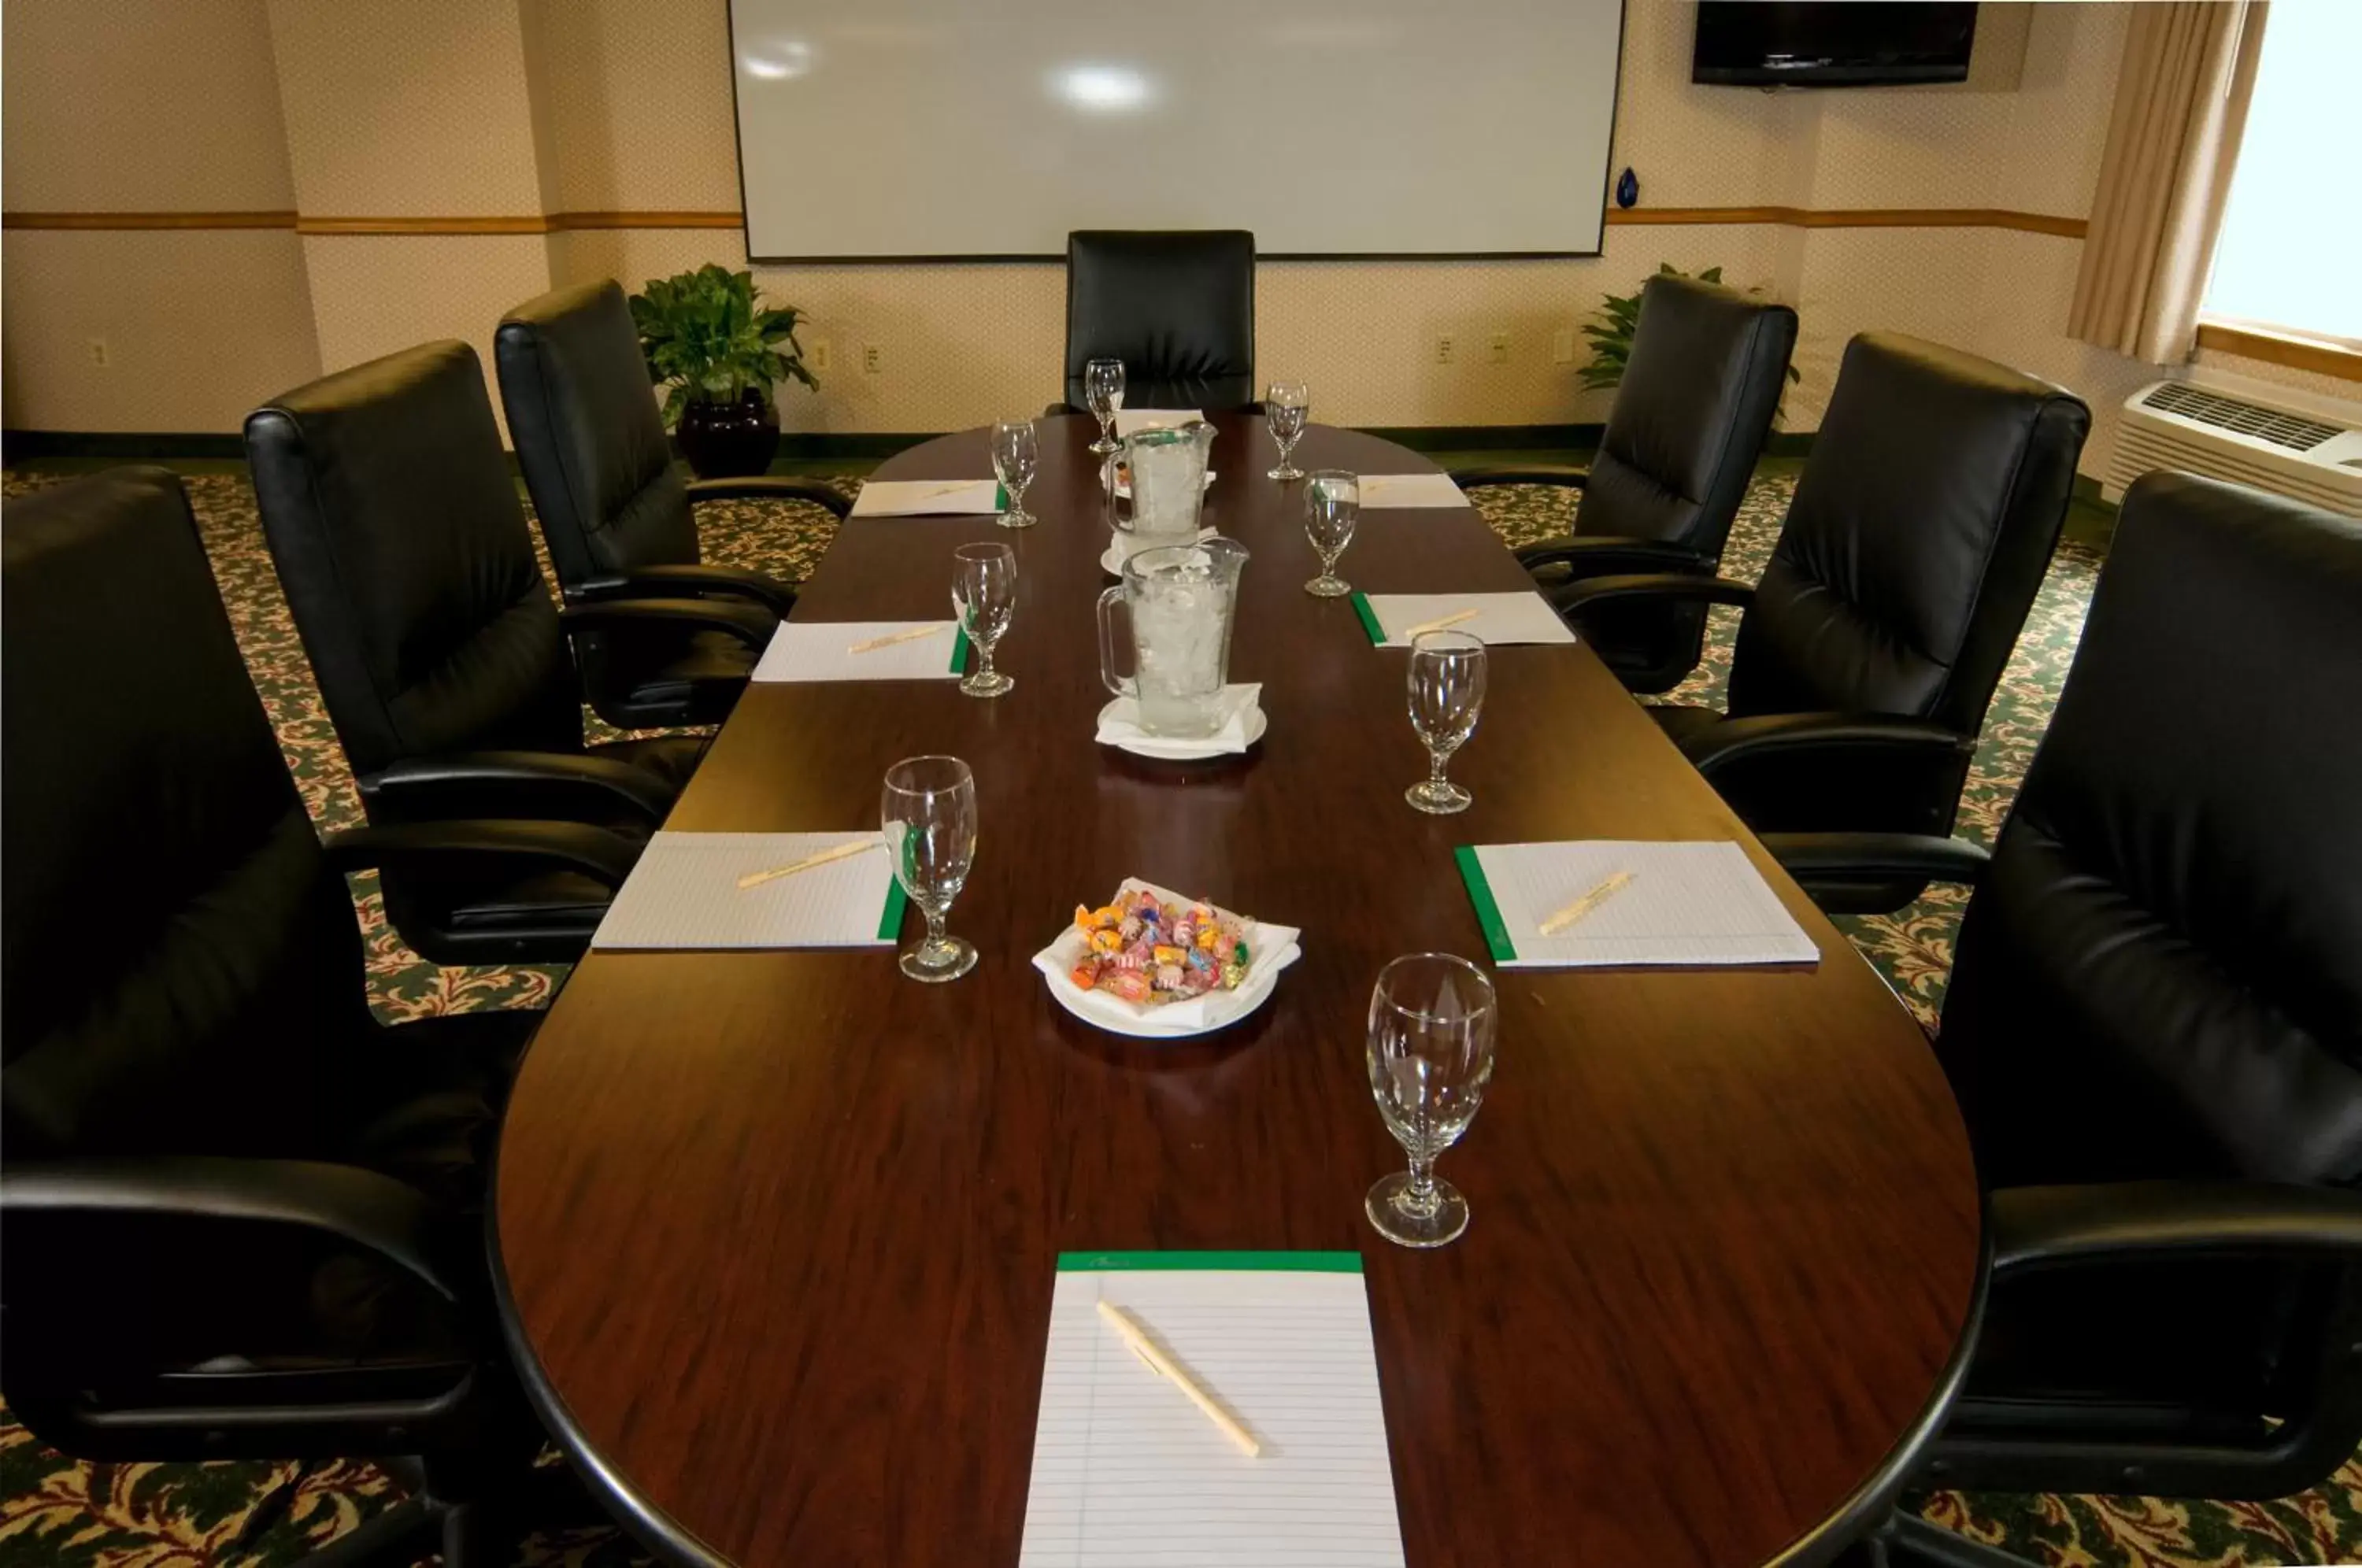 Business facilities in Meadowlands Plaza Hotel